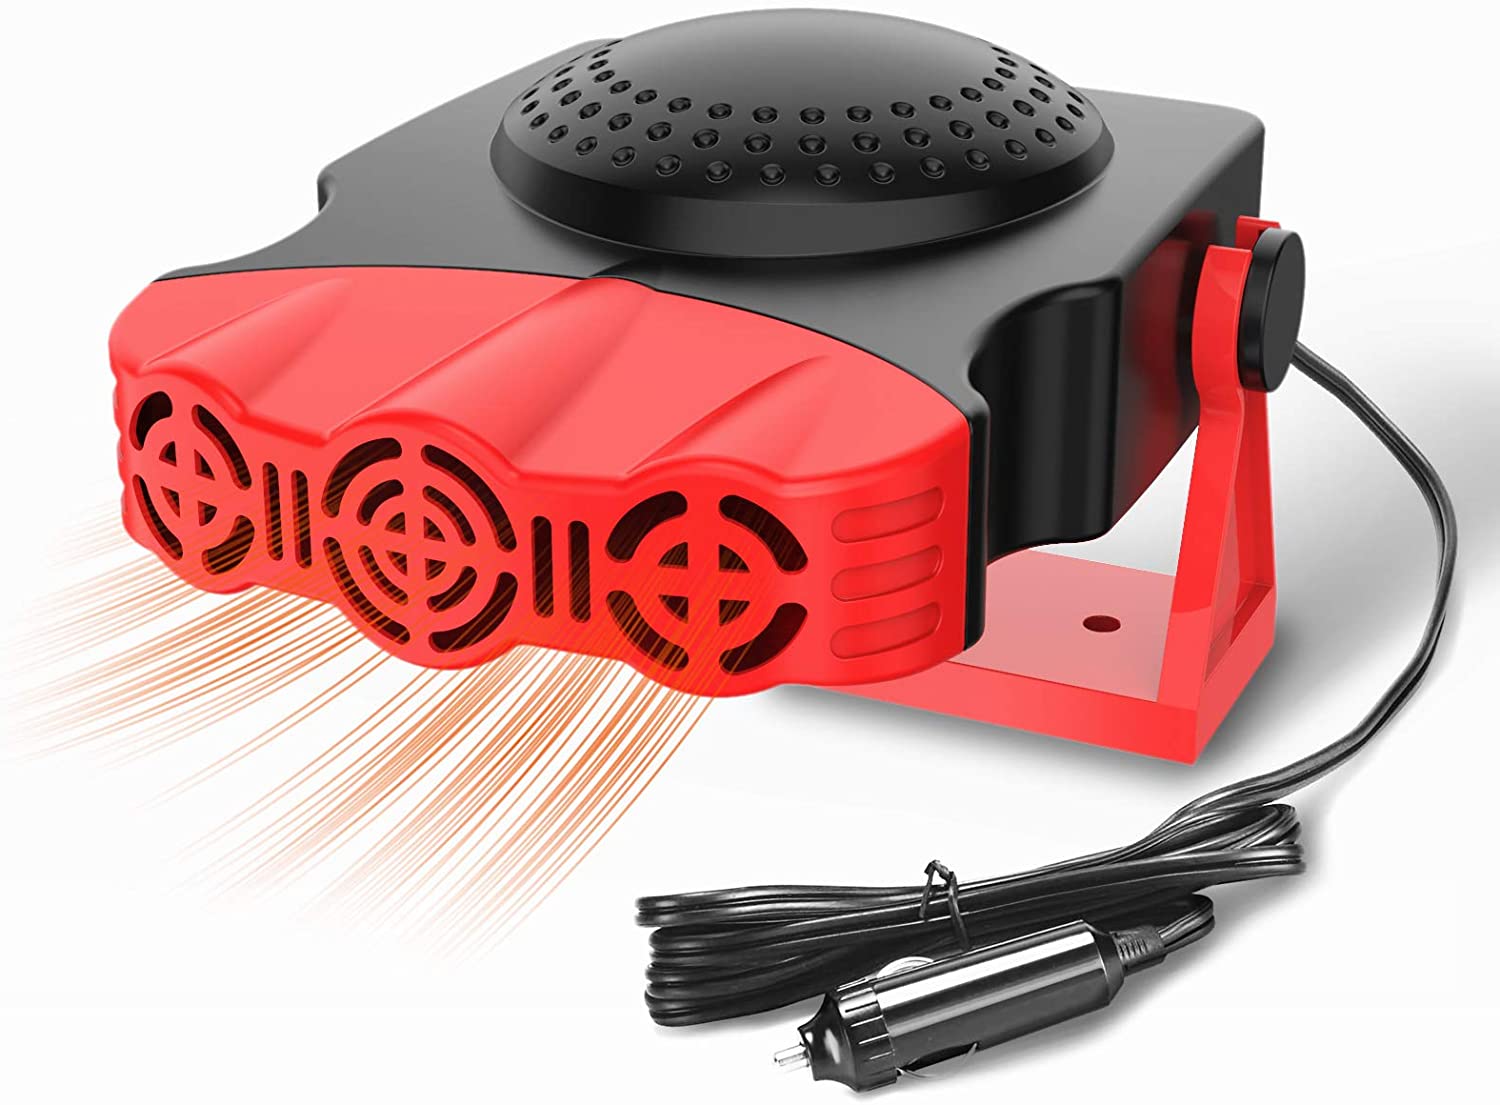 Car Heater, 12v Car Vehicle Electric Auto Hot Warm Heater Fan Red